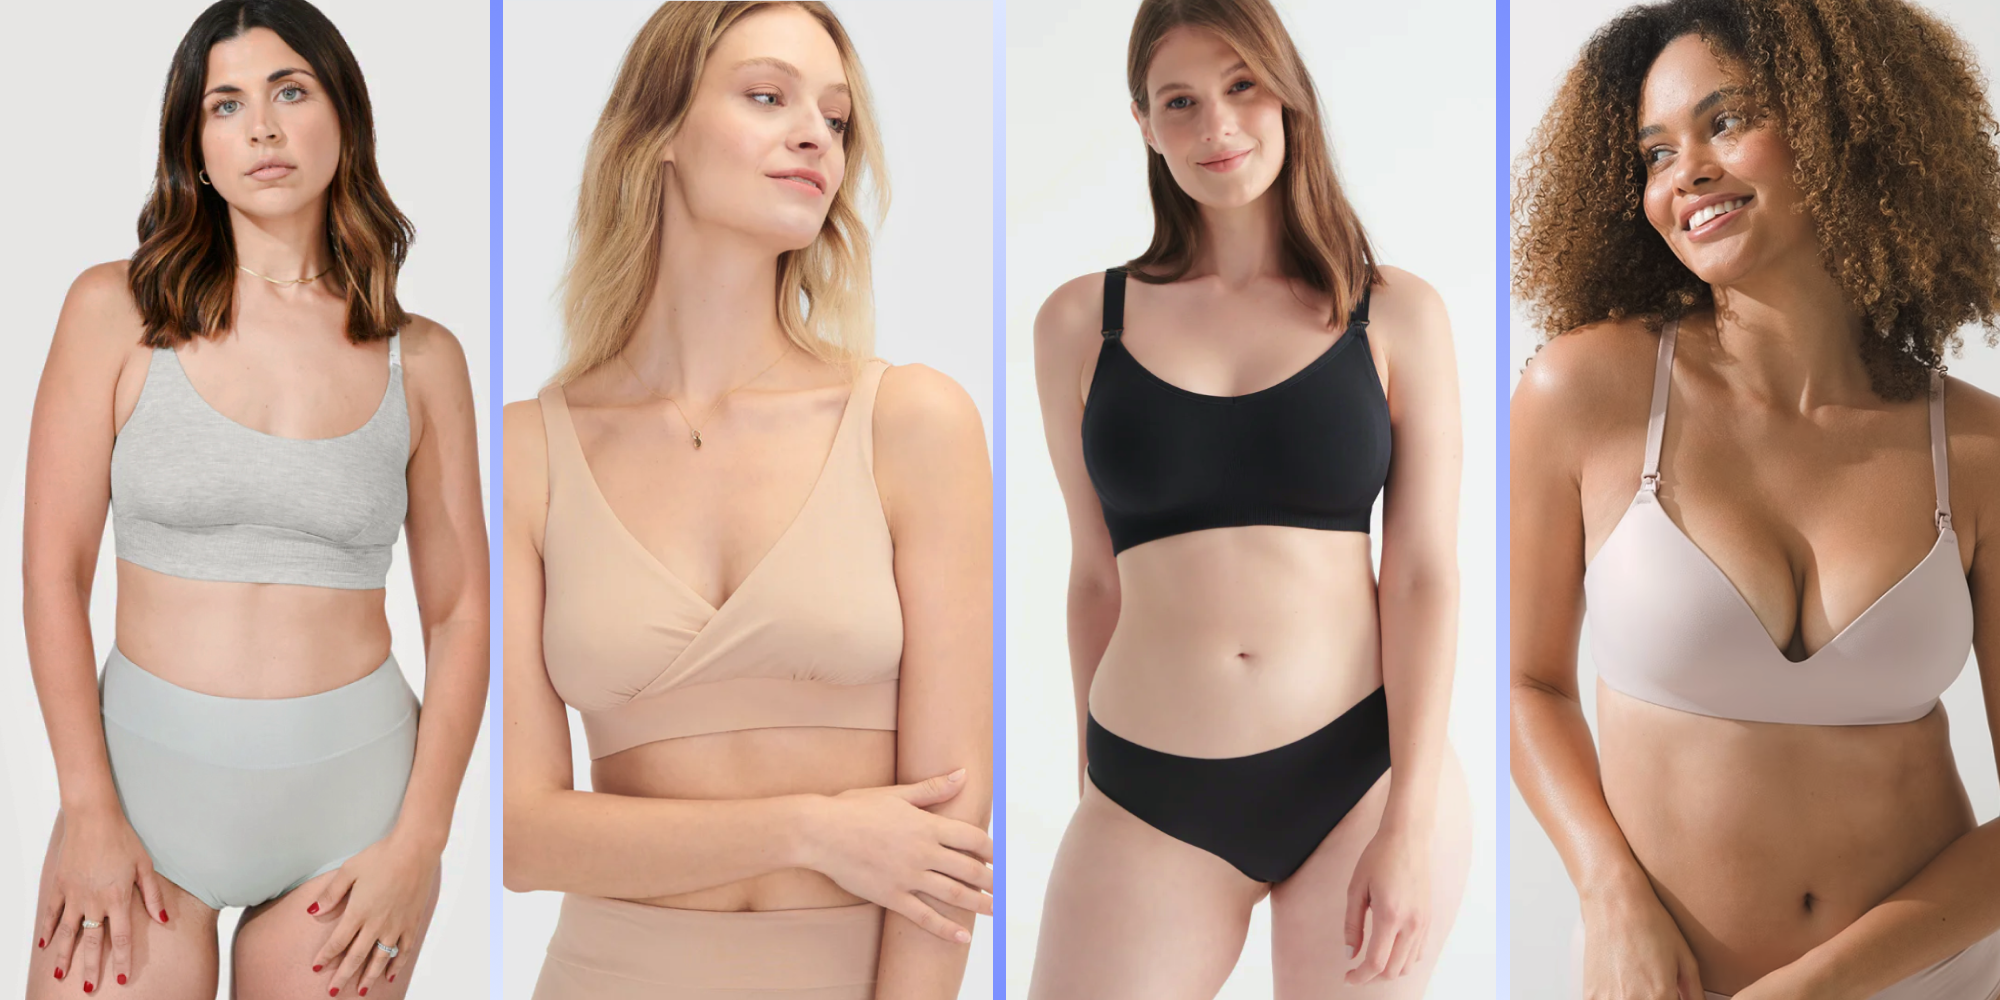 Top 4 Most Supportive Nursing Bras for Large Breasts - Best Maternity Bras  For Big Boobs